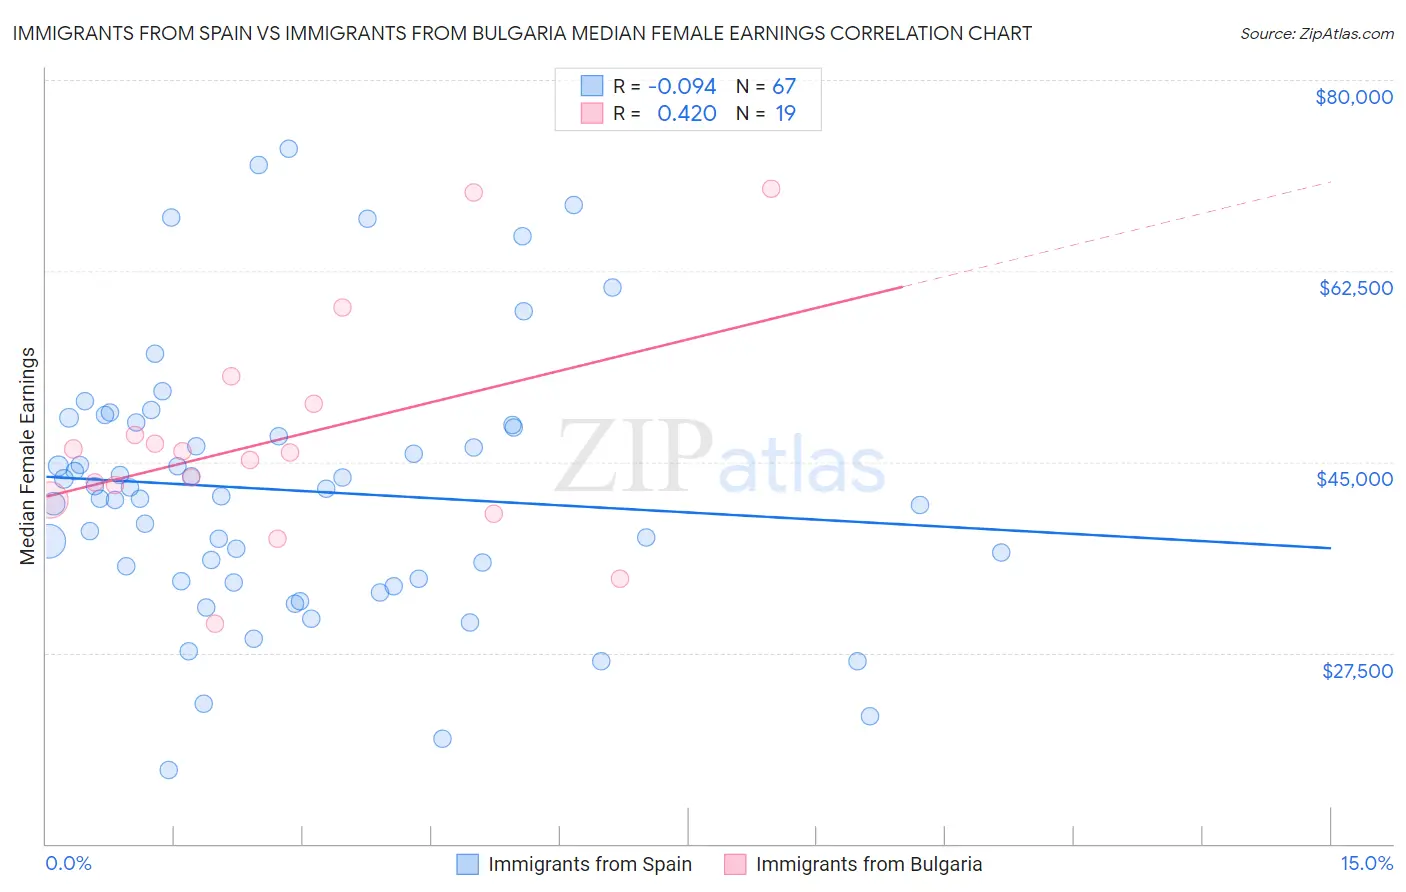 Immigrants from Spain vs Immigrants from Bulgaria Median Female Earnings